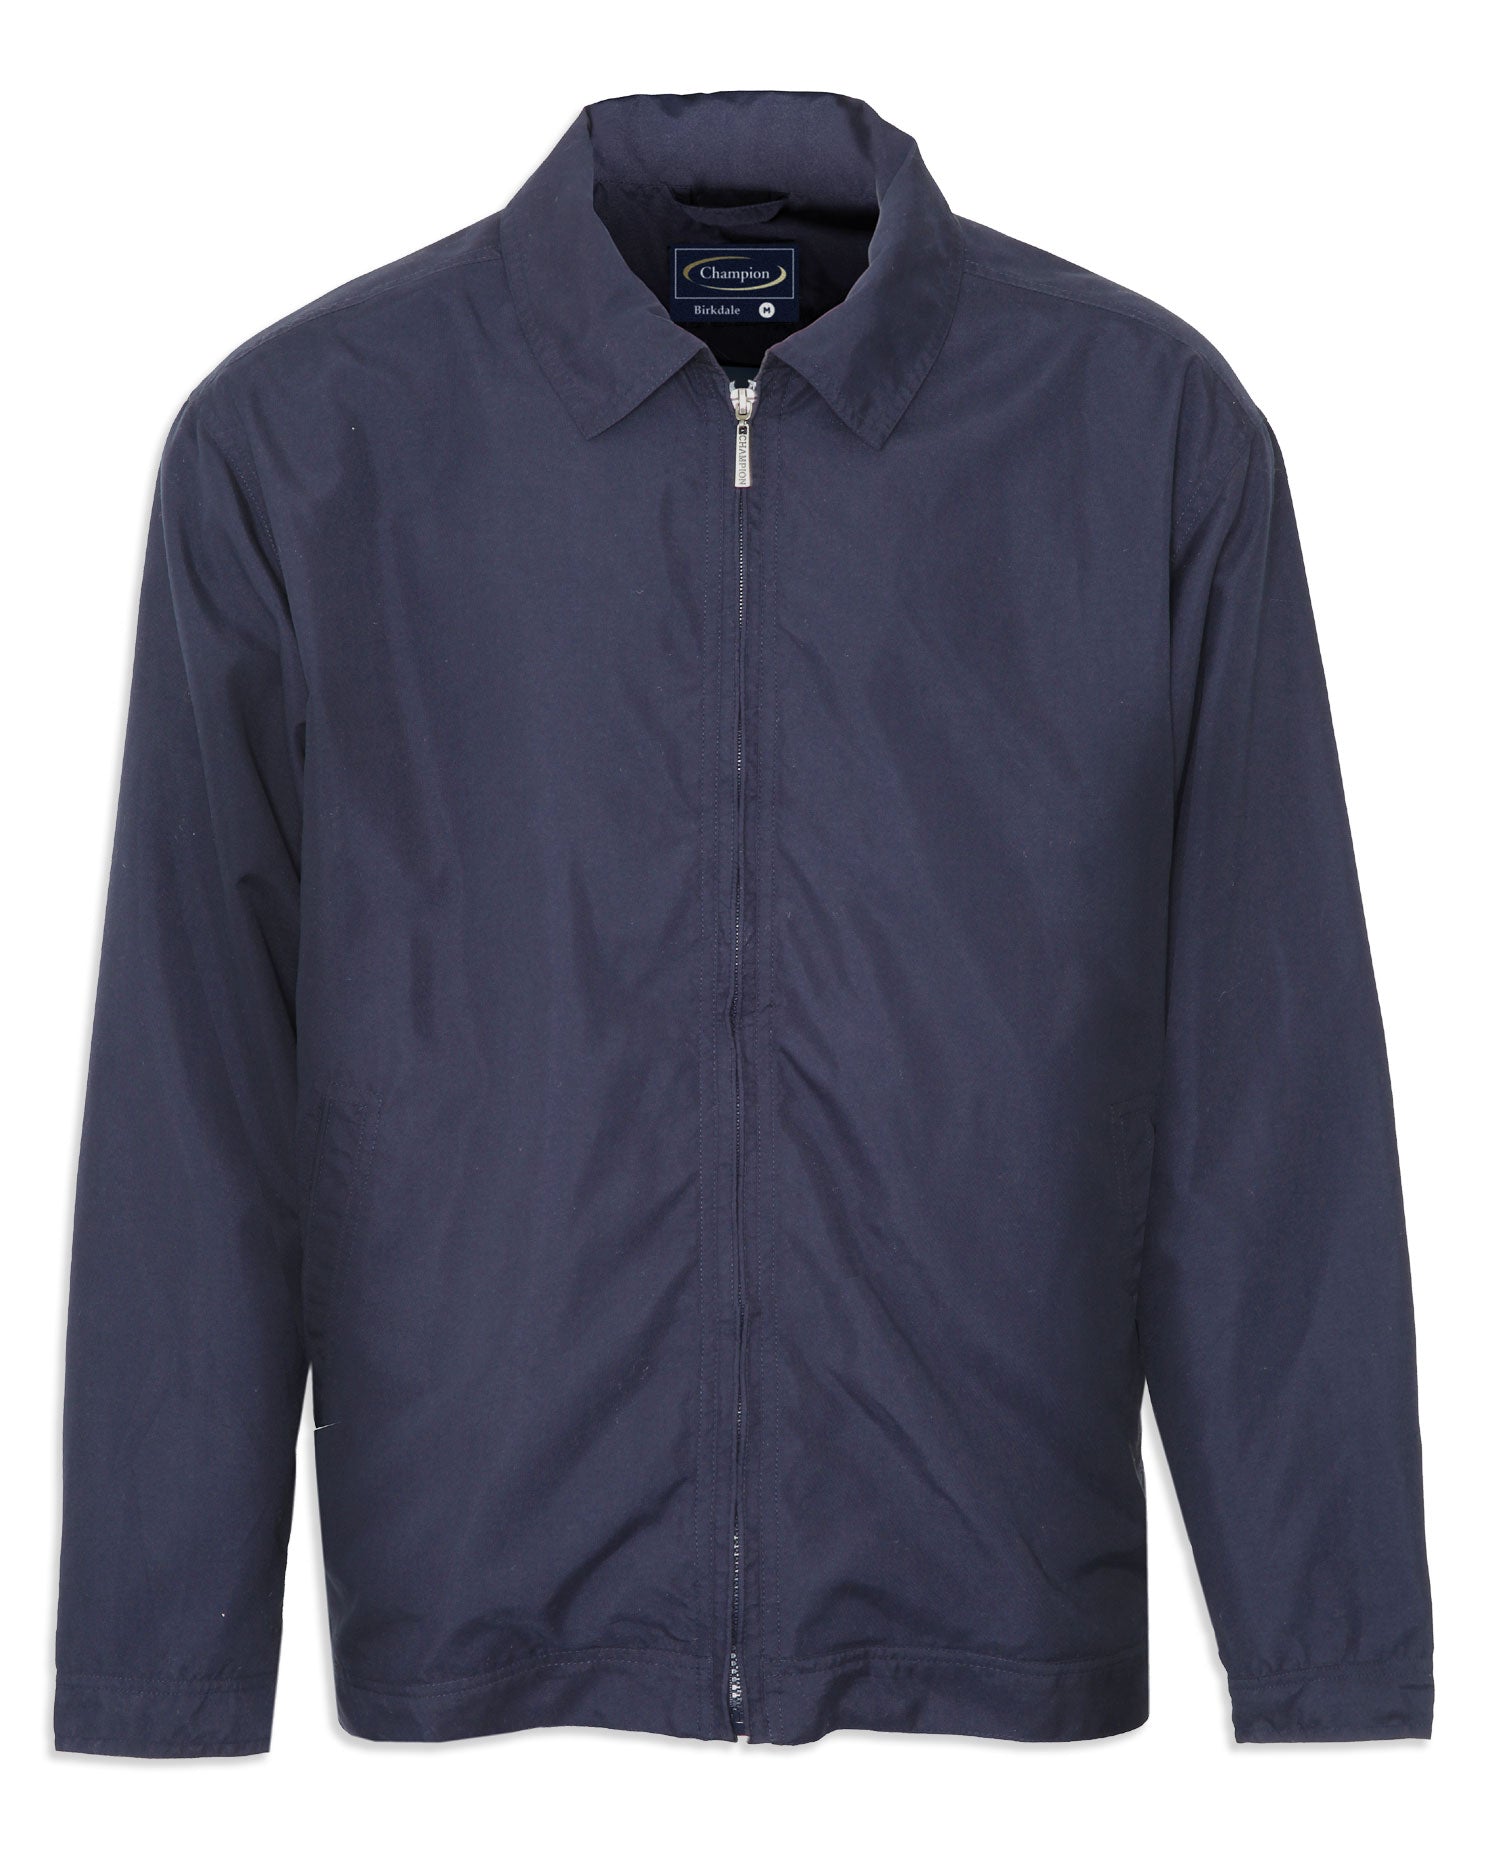 Champion birkdale jacket in navy with zip front,